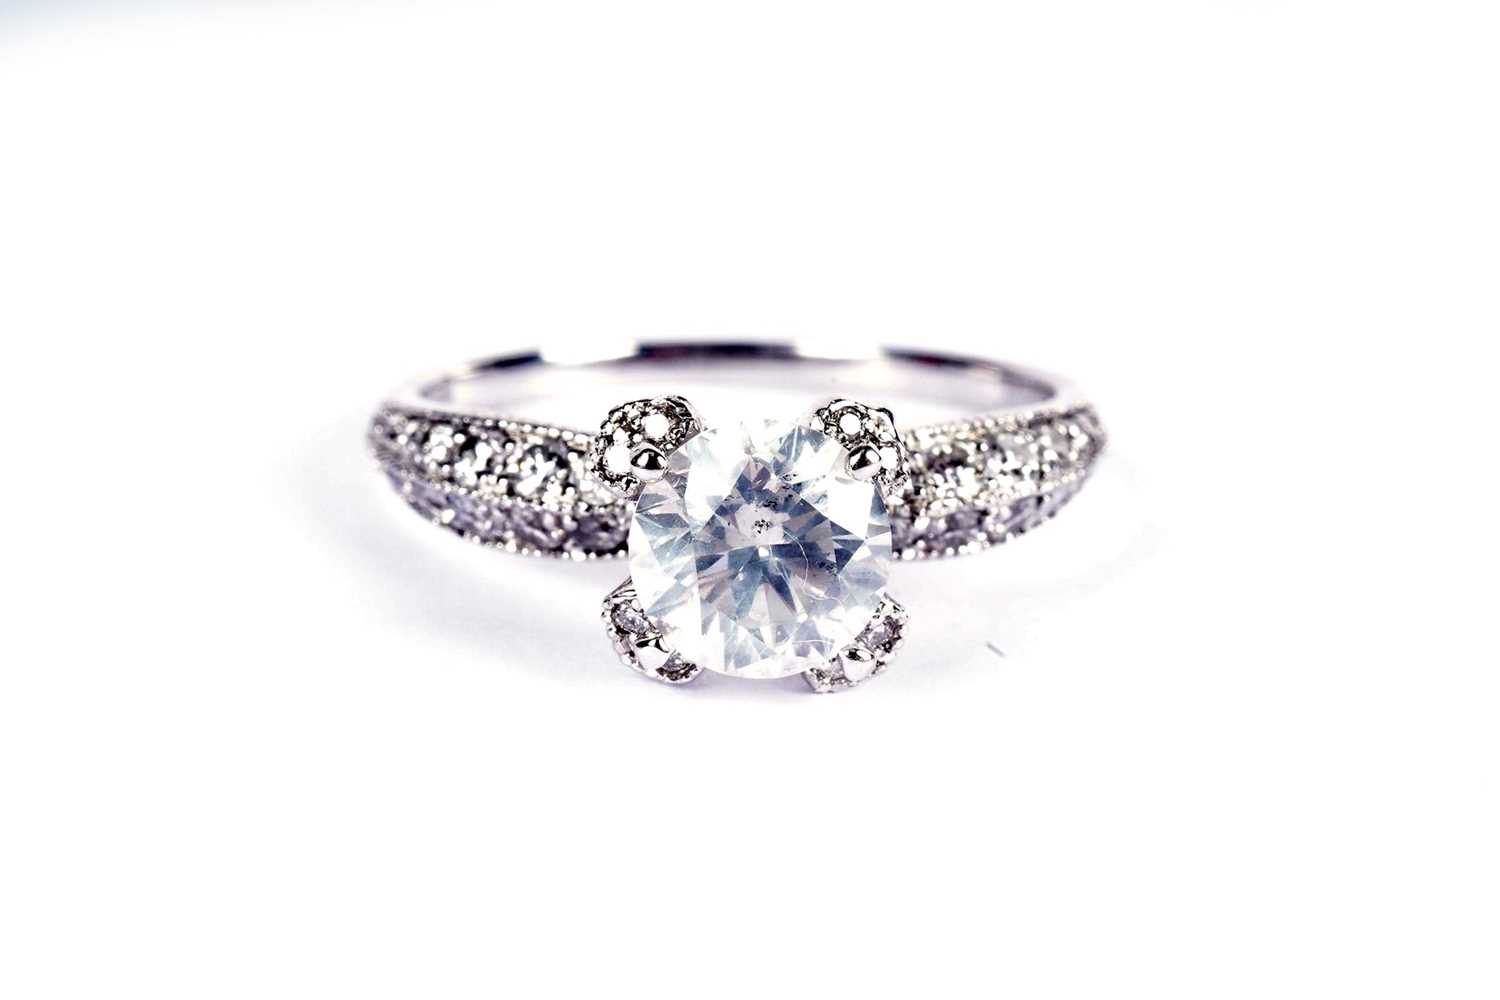 A solitaire diamond ring - Image 6 of 9